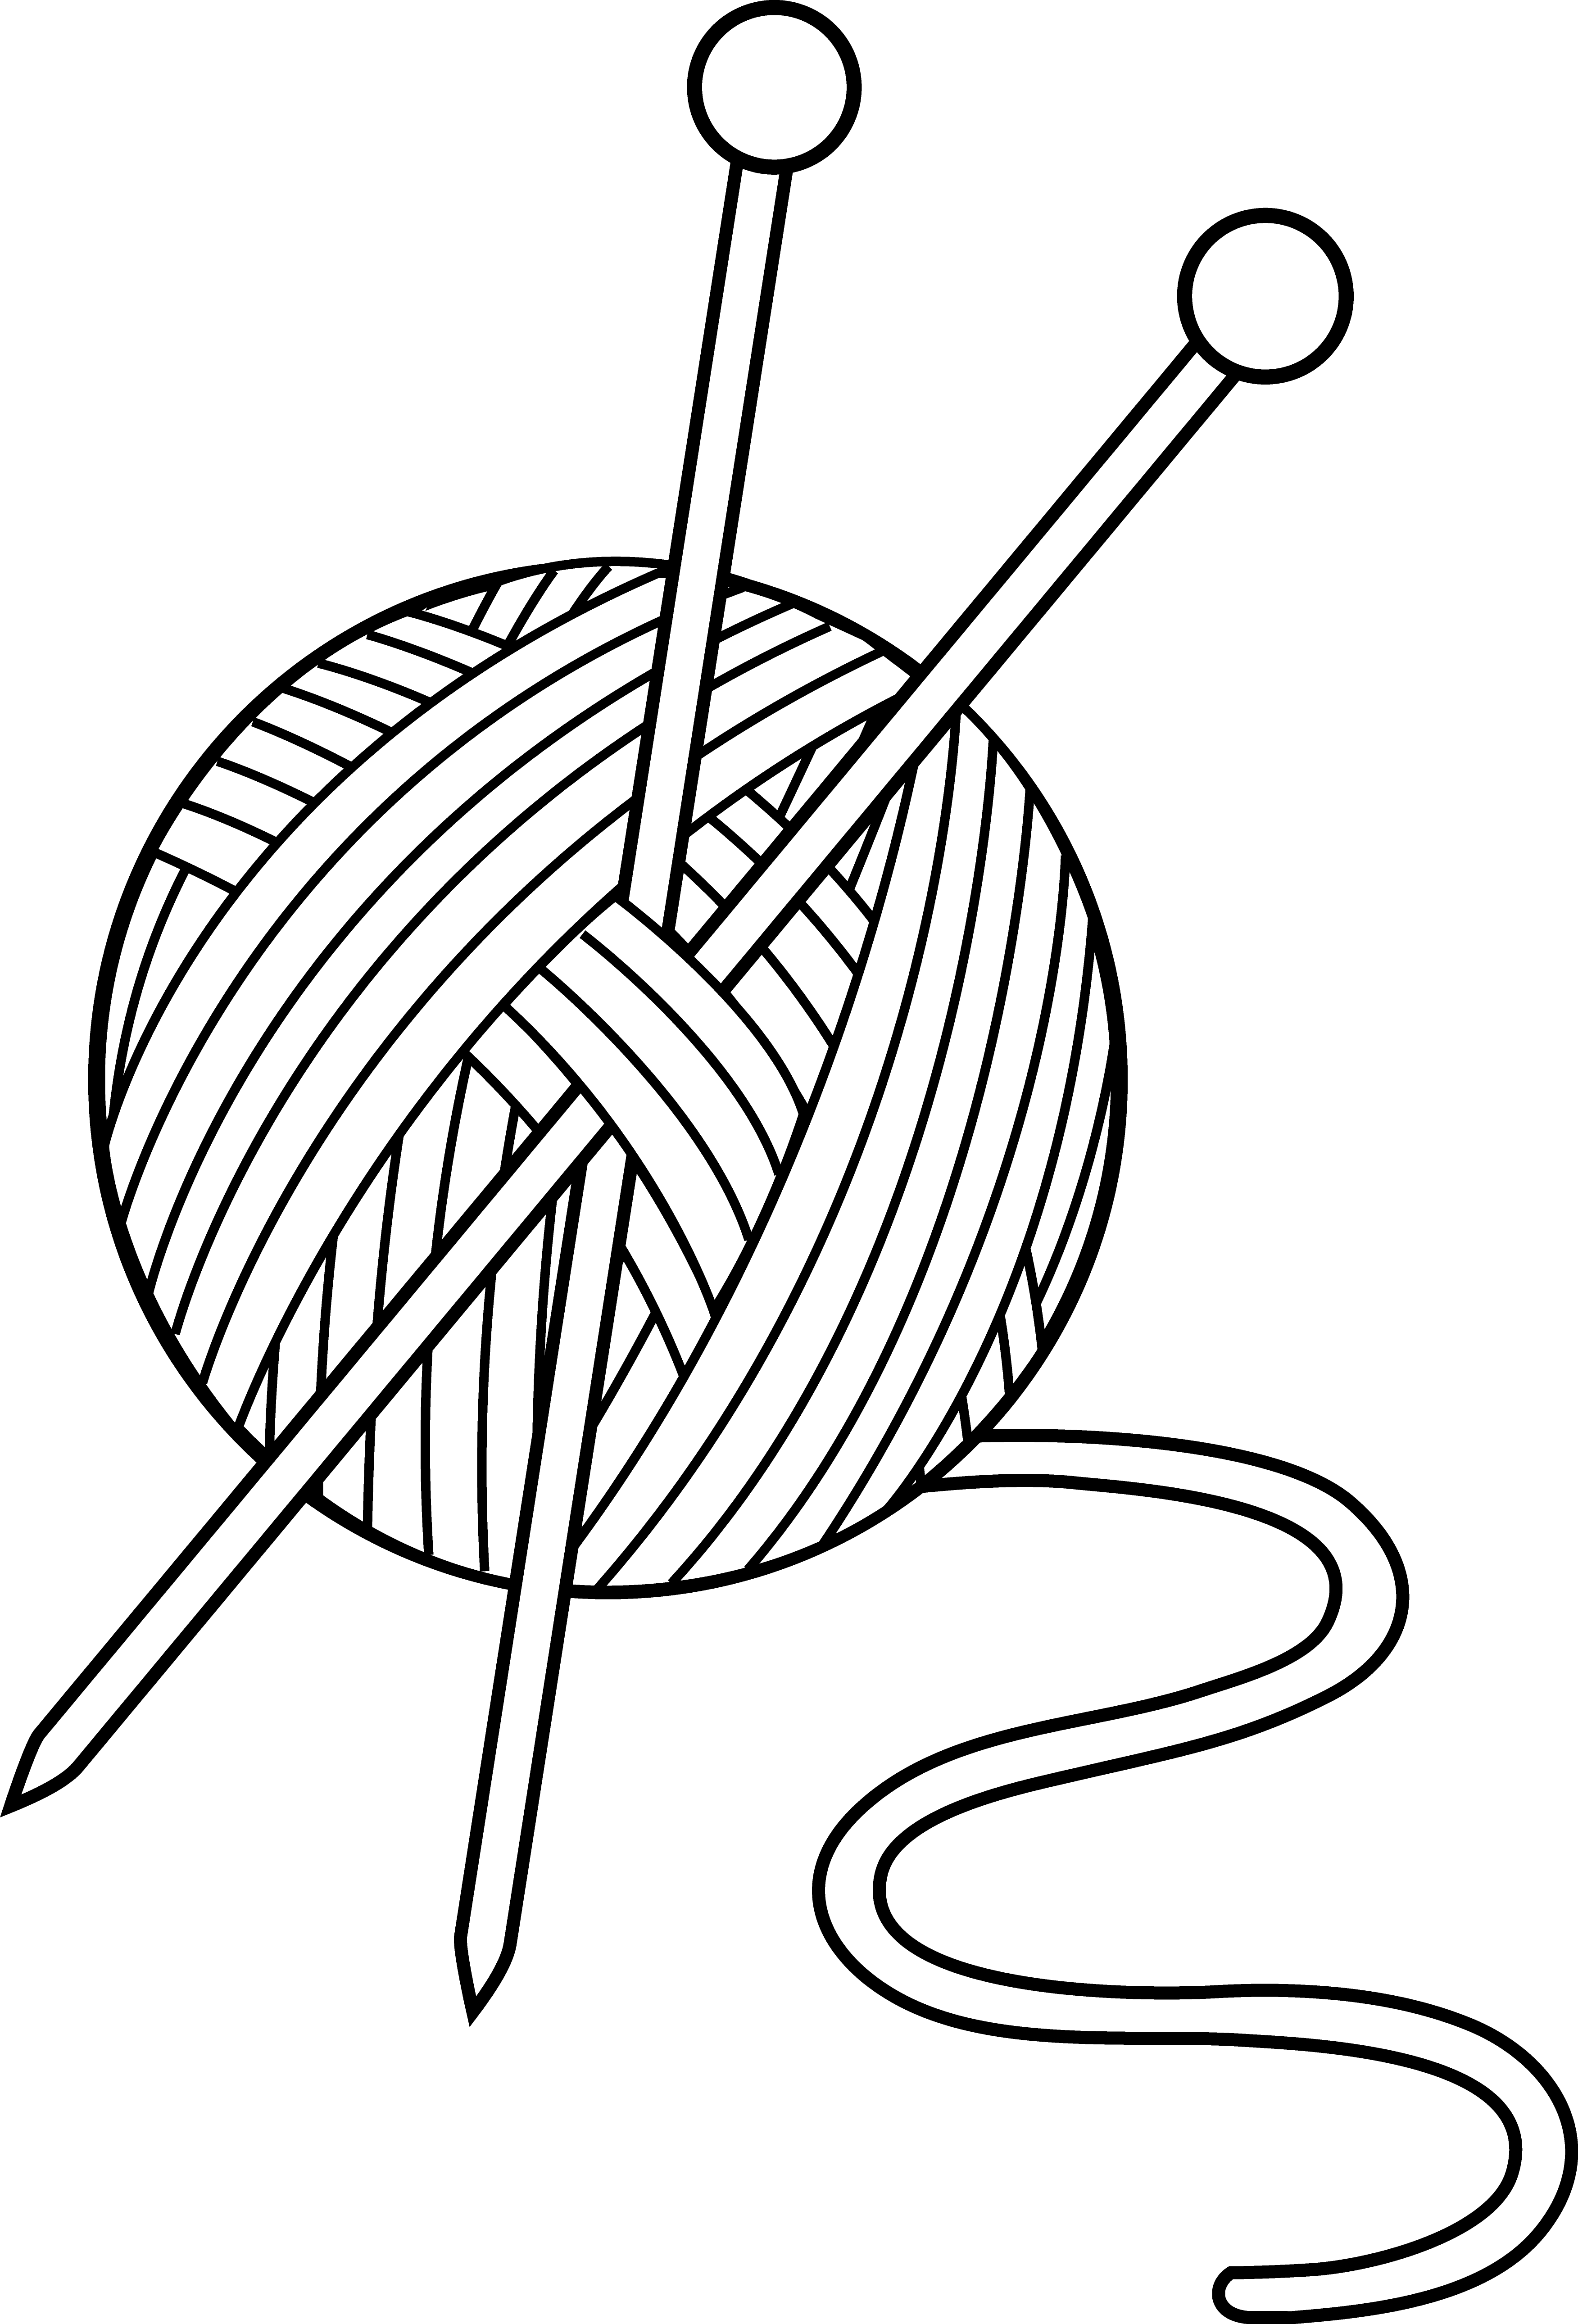 Dust clipart black and white. Knitting set free clip